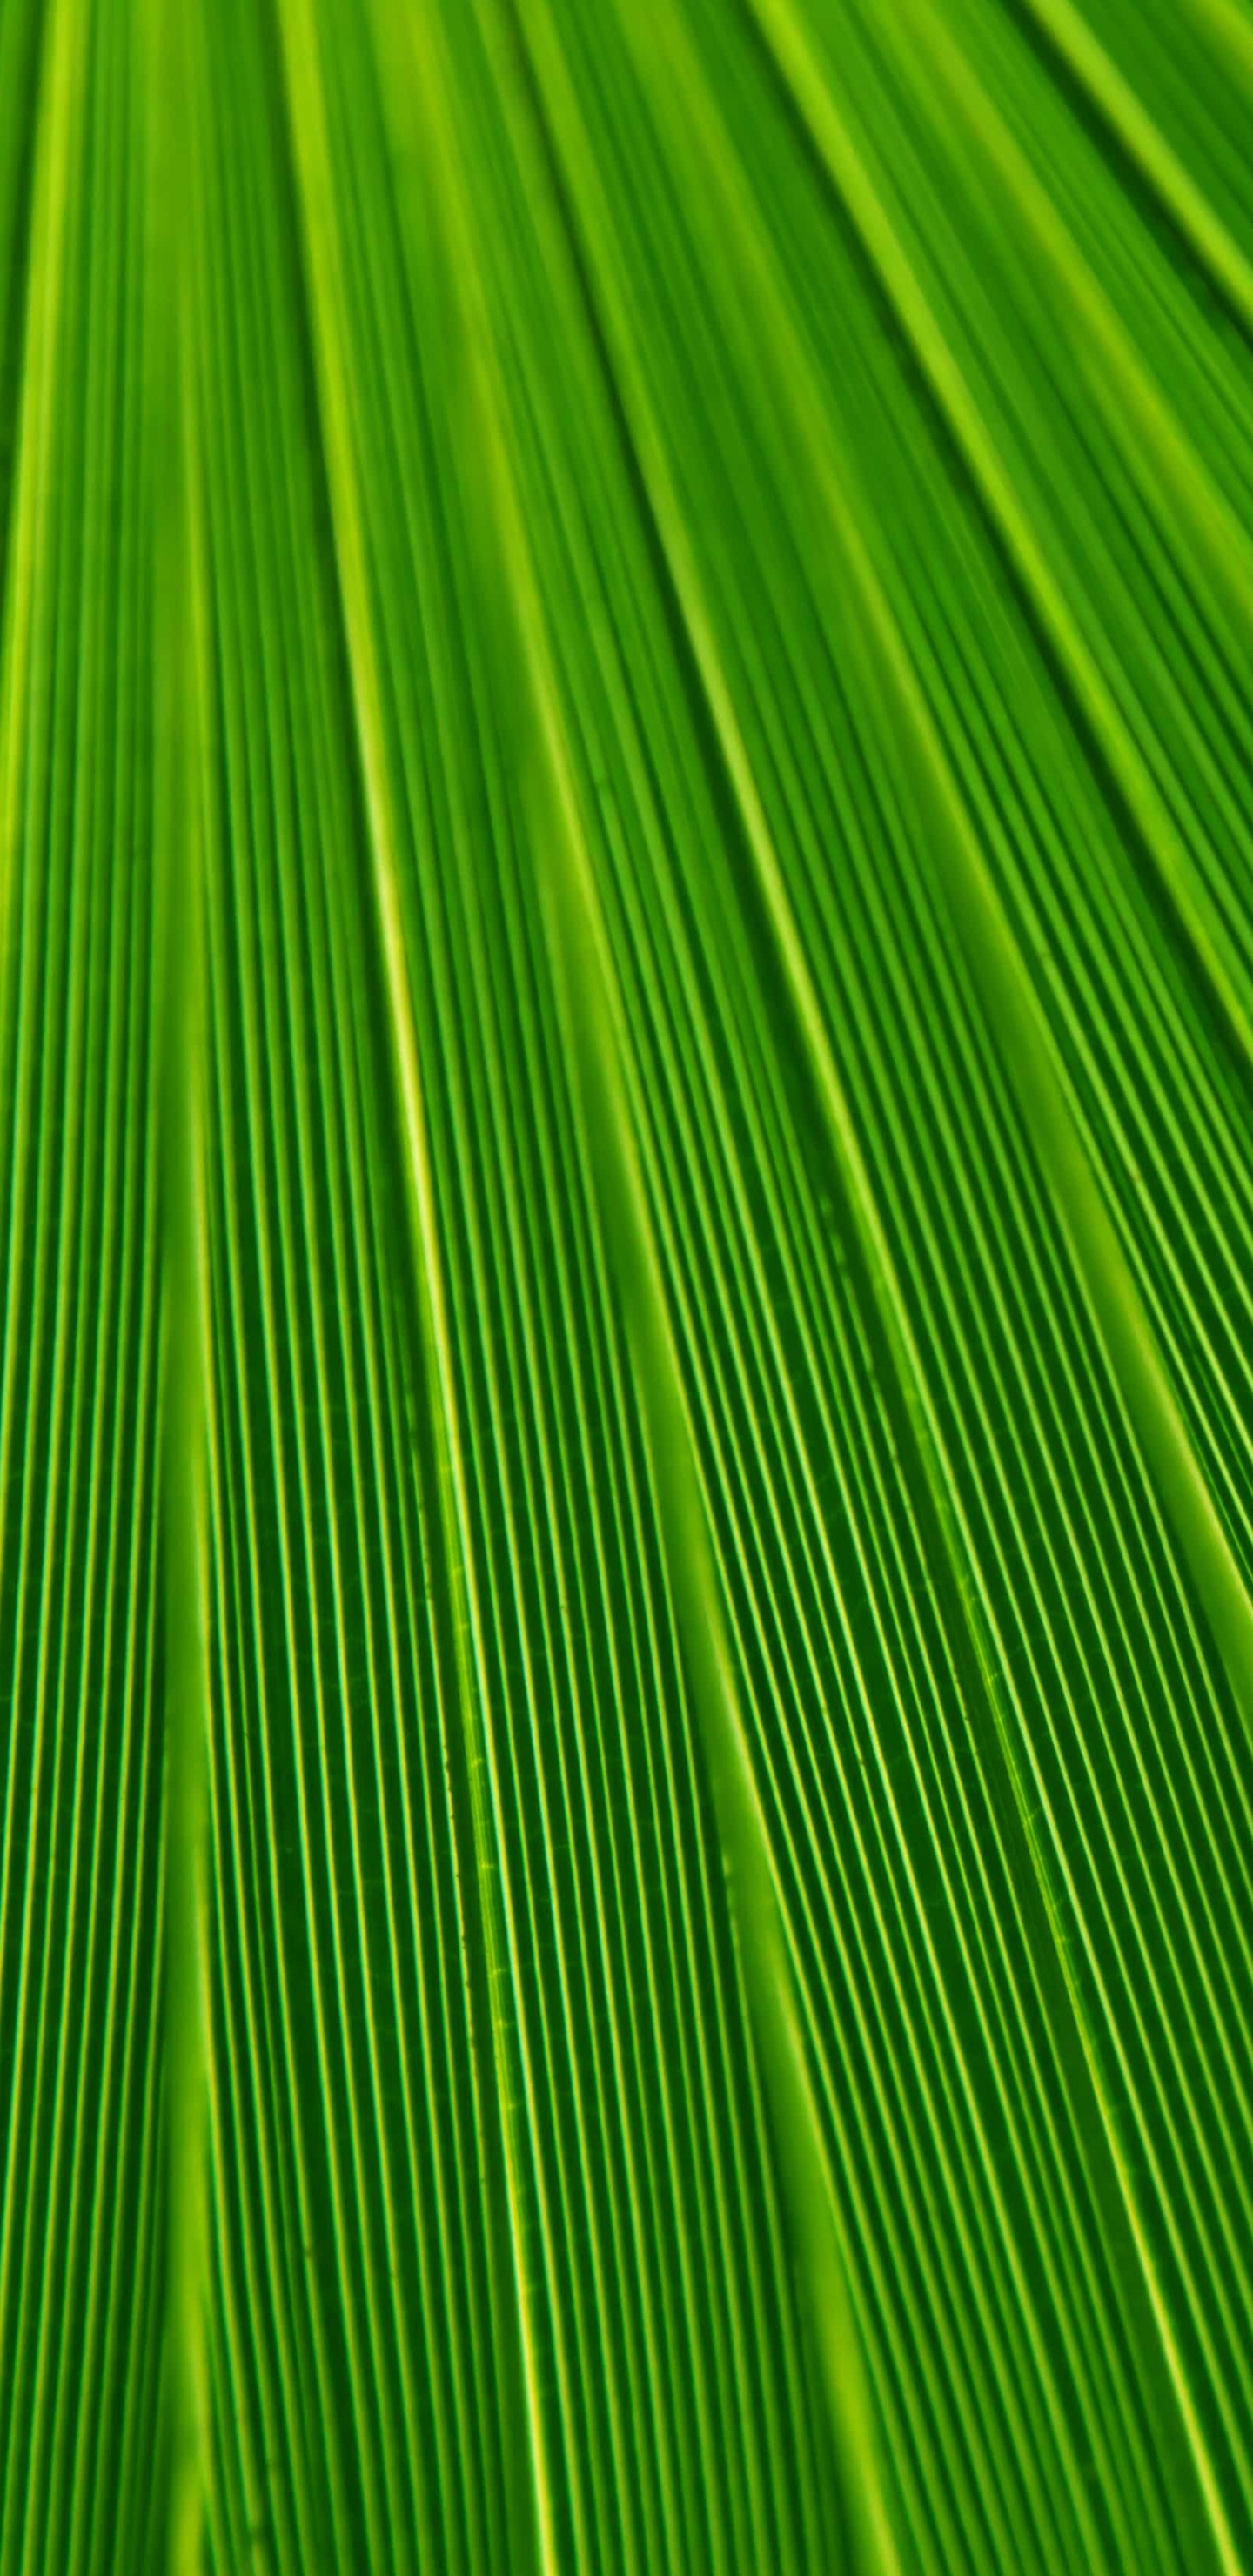 Green and Yellow Striped Textile. Wallpaper in 1440x2960 Resolution